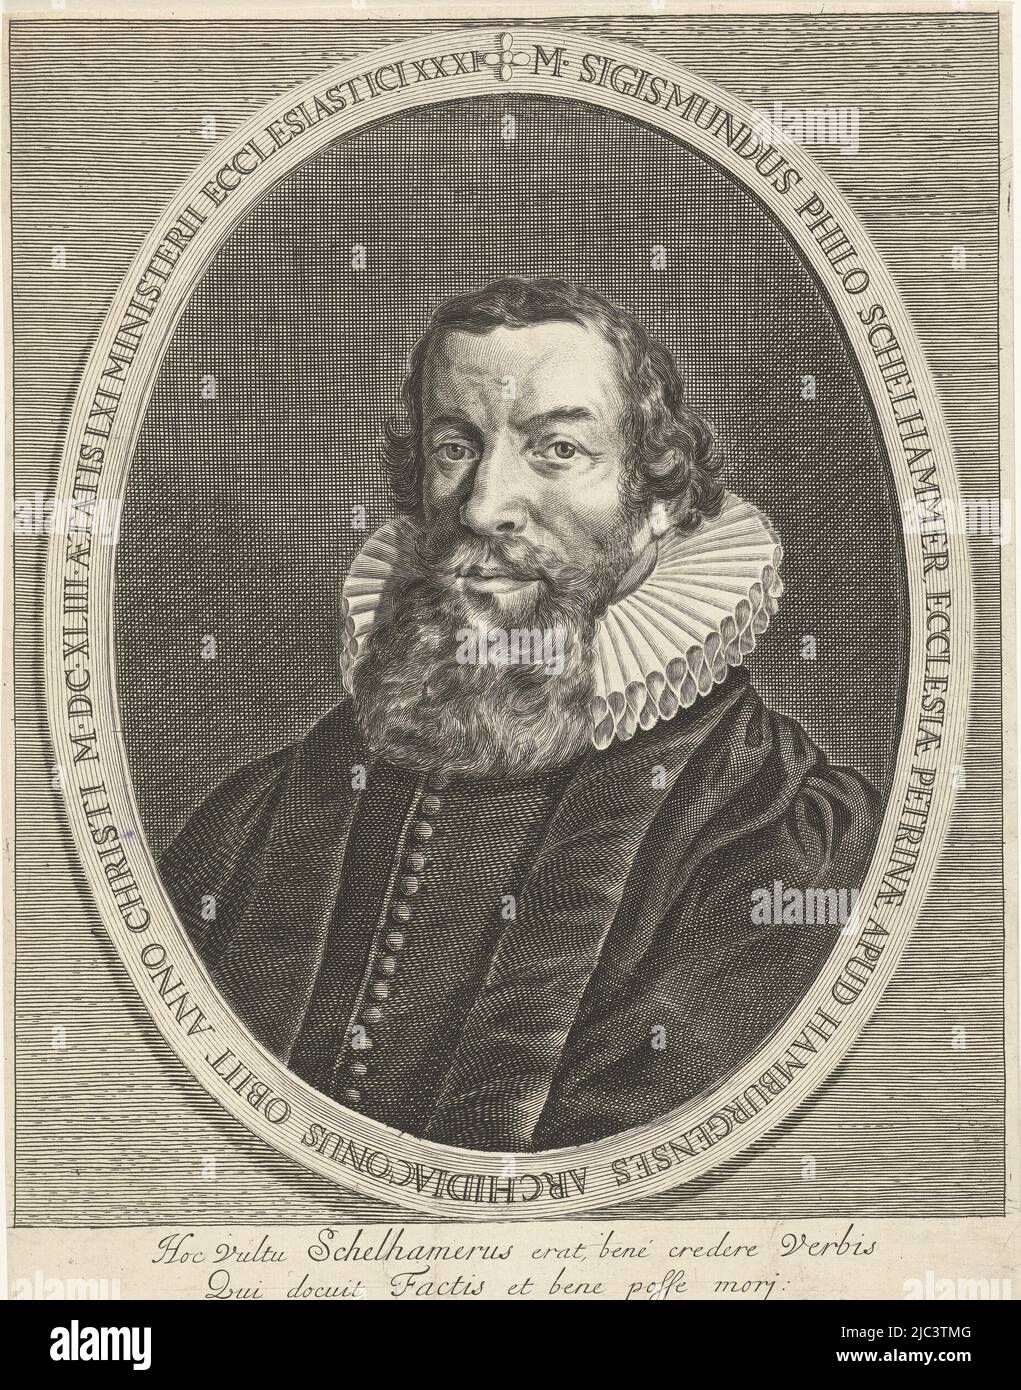 Portrait of Sigismund Philo Schelhammer. With a caption in Latin of eight lines., Portrait of Sigismund Philo Schelhammer, print maker: Hendrik Bary, (mentioned on object), Netherlands, c. 1657 - c. 1707, paper, engraving, h 305 mm × w 205 mm Stock Photo